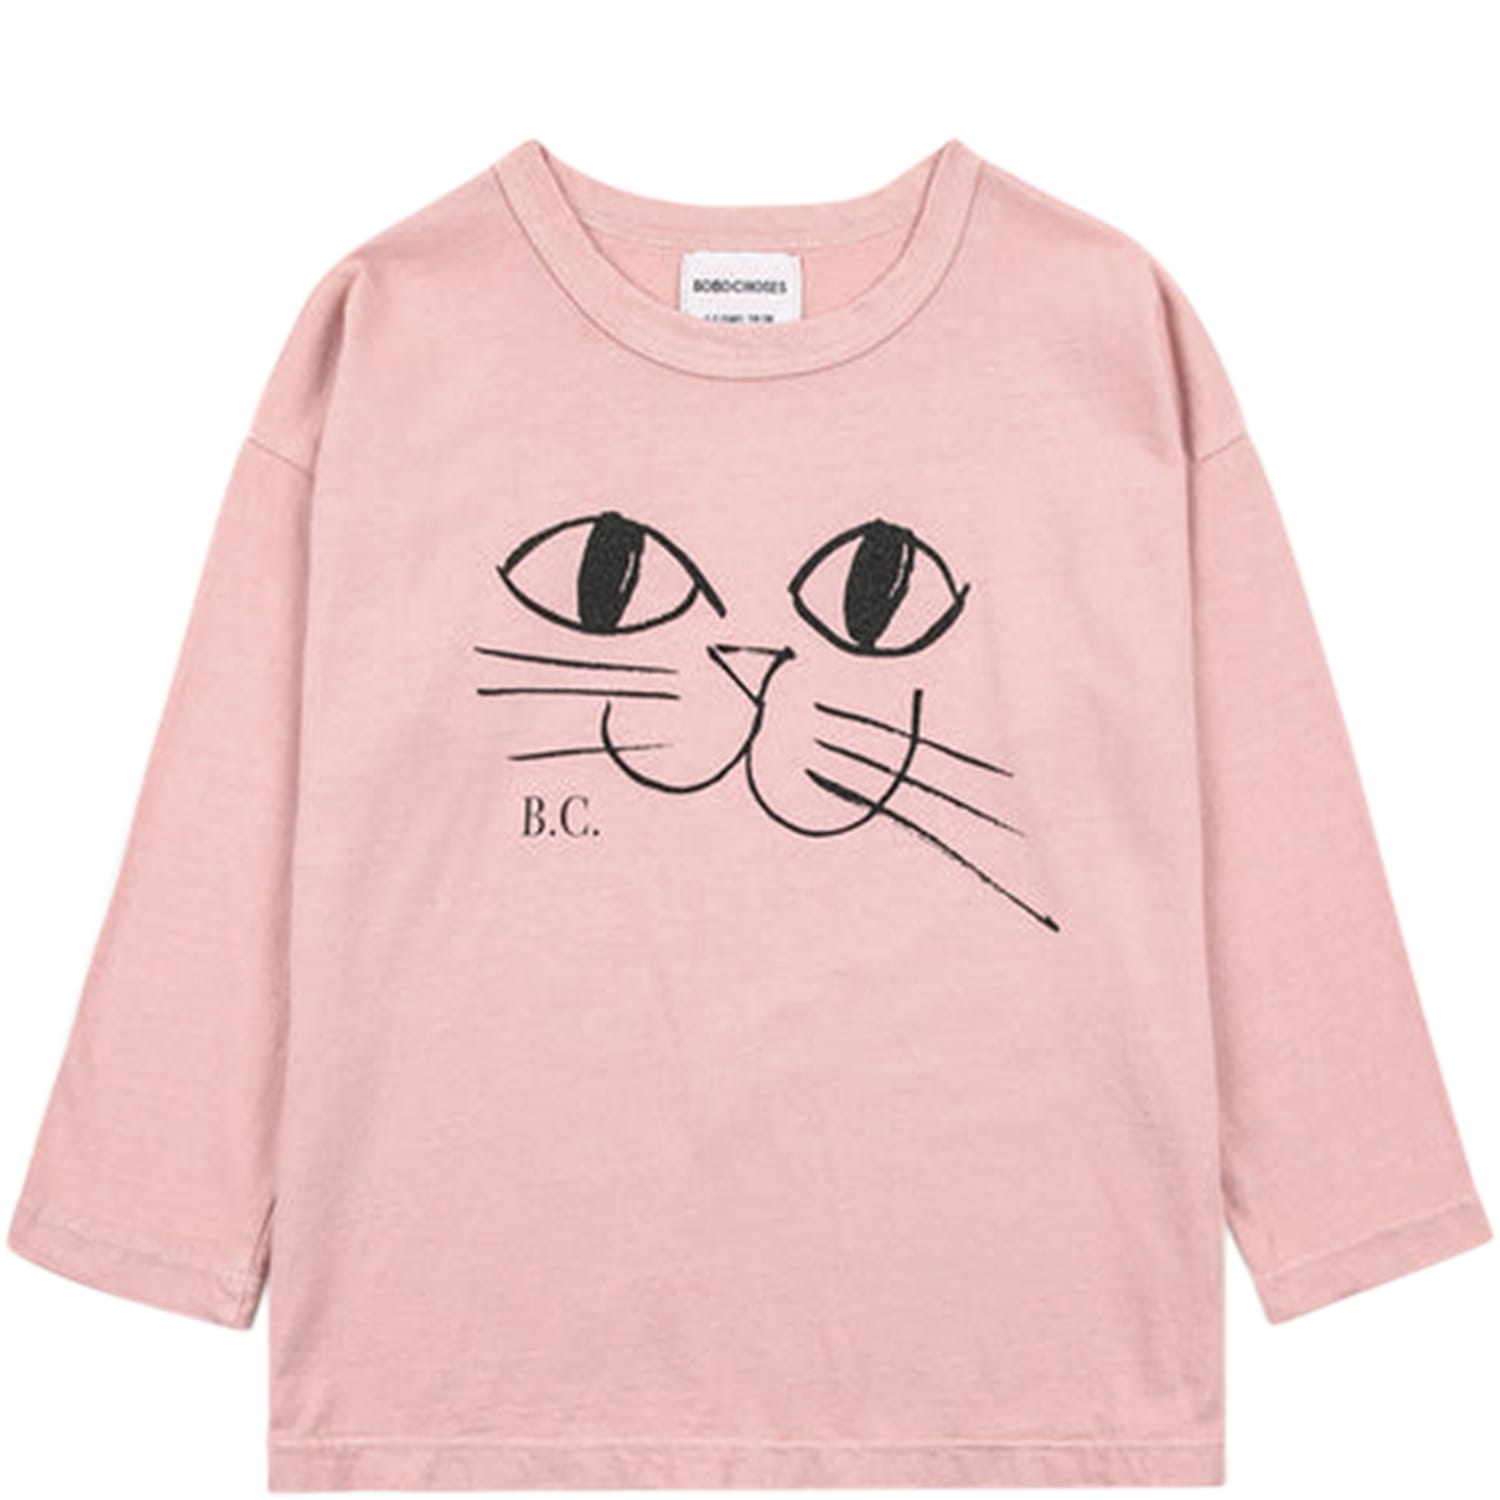 BOBO CHOSES PINK T-SHIRT FOR GIRL WITH CAT PRINT AND LOGO